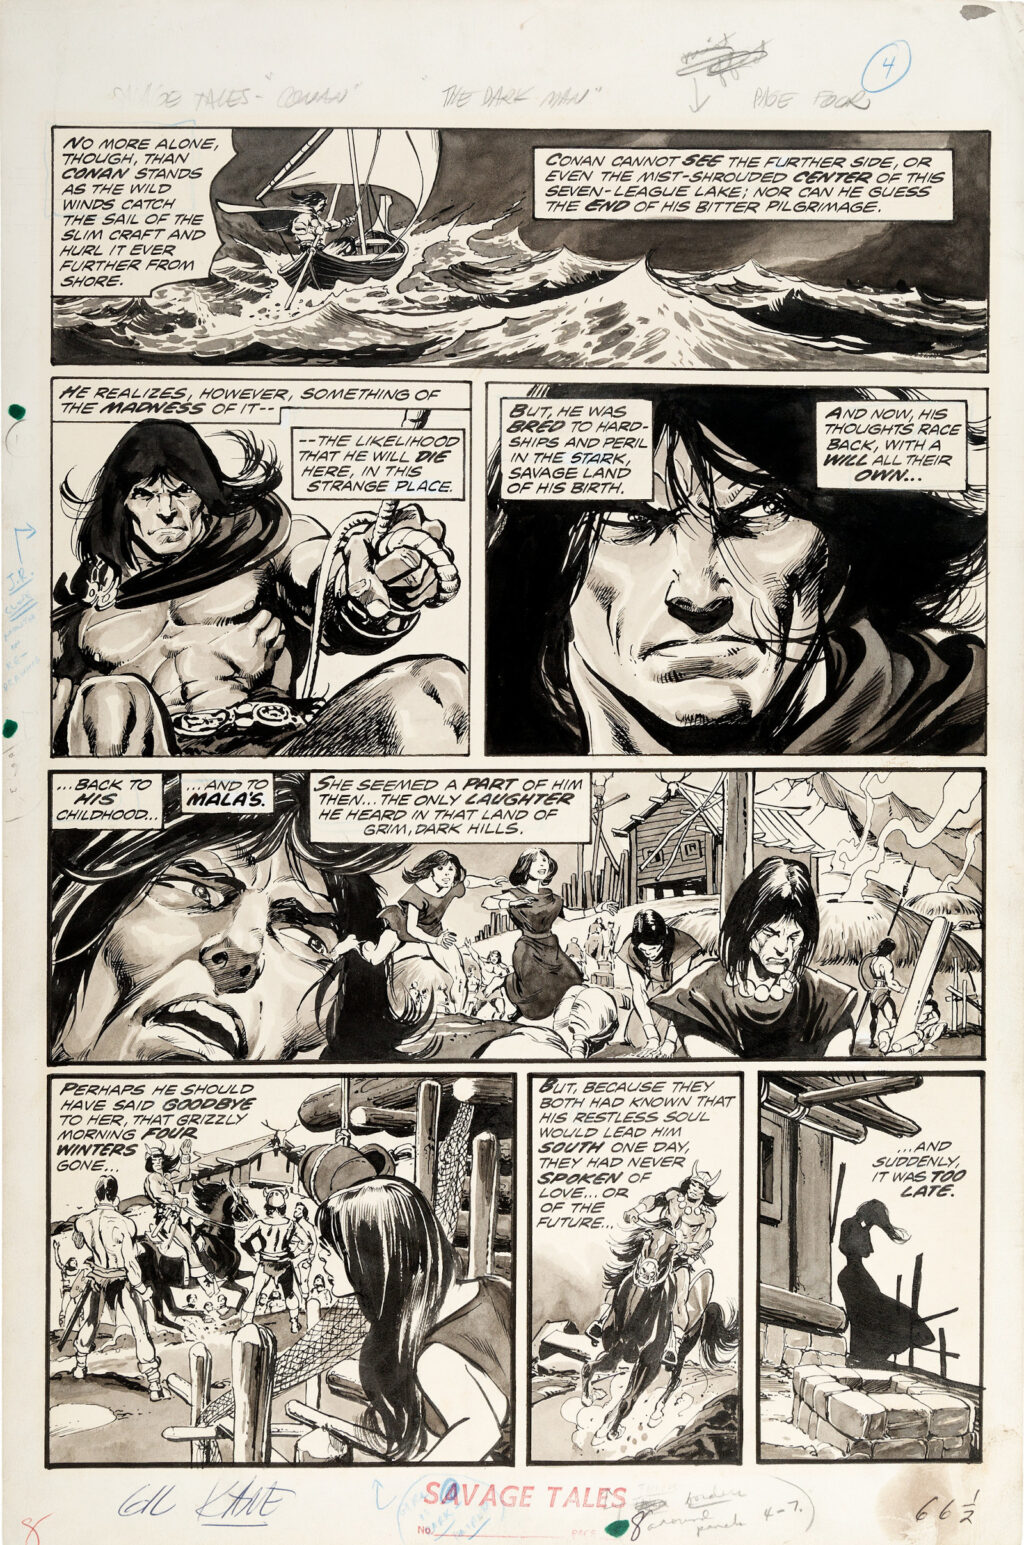 Savage Tales issue 4 page 4 by Gil Kane and Neal Adams